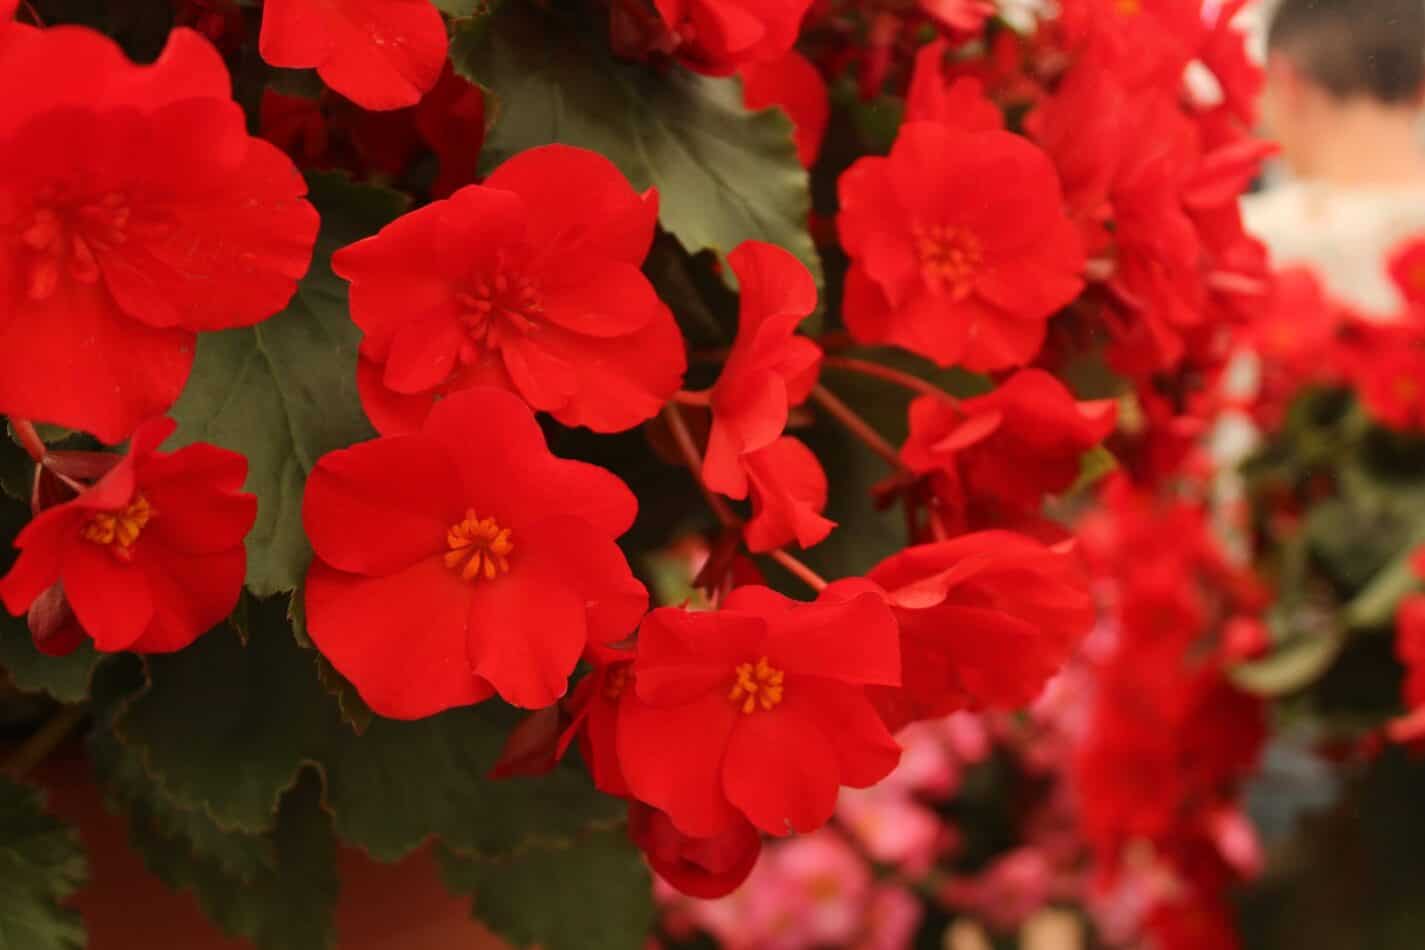 Begonias meaning and symbolism